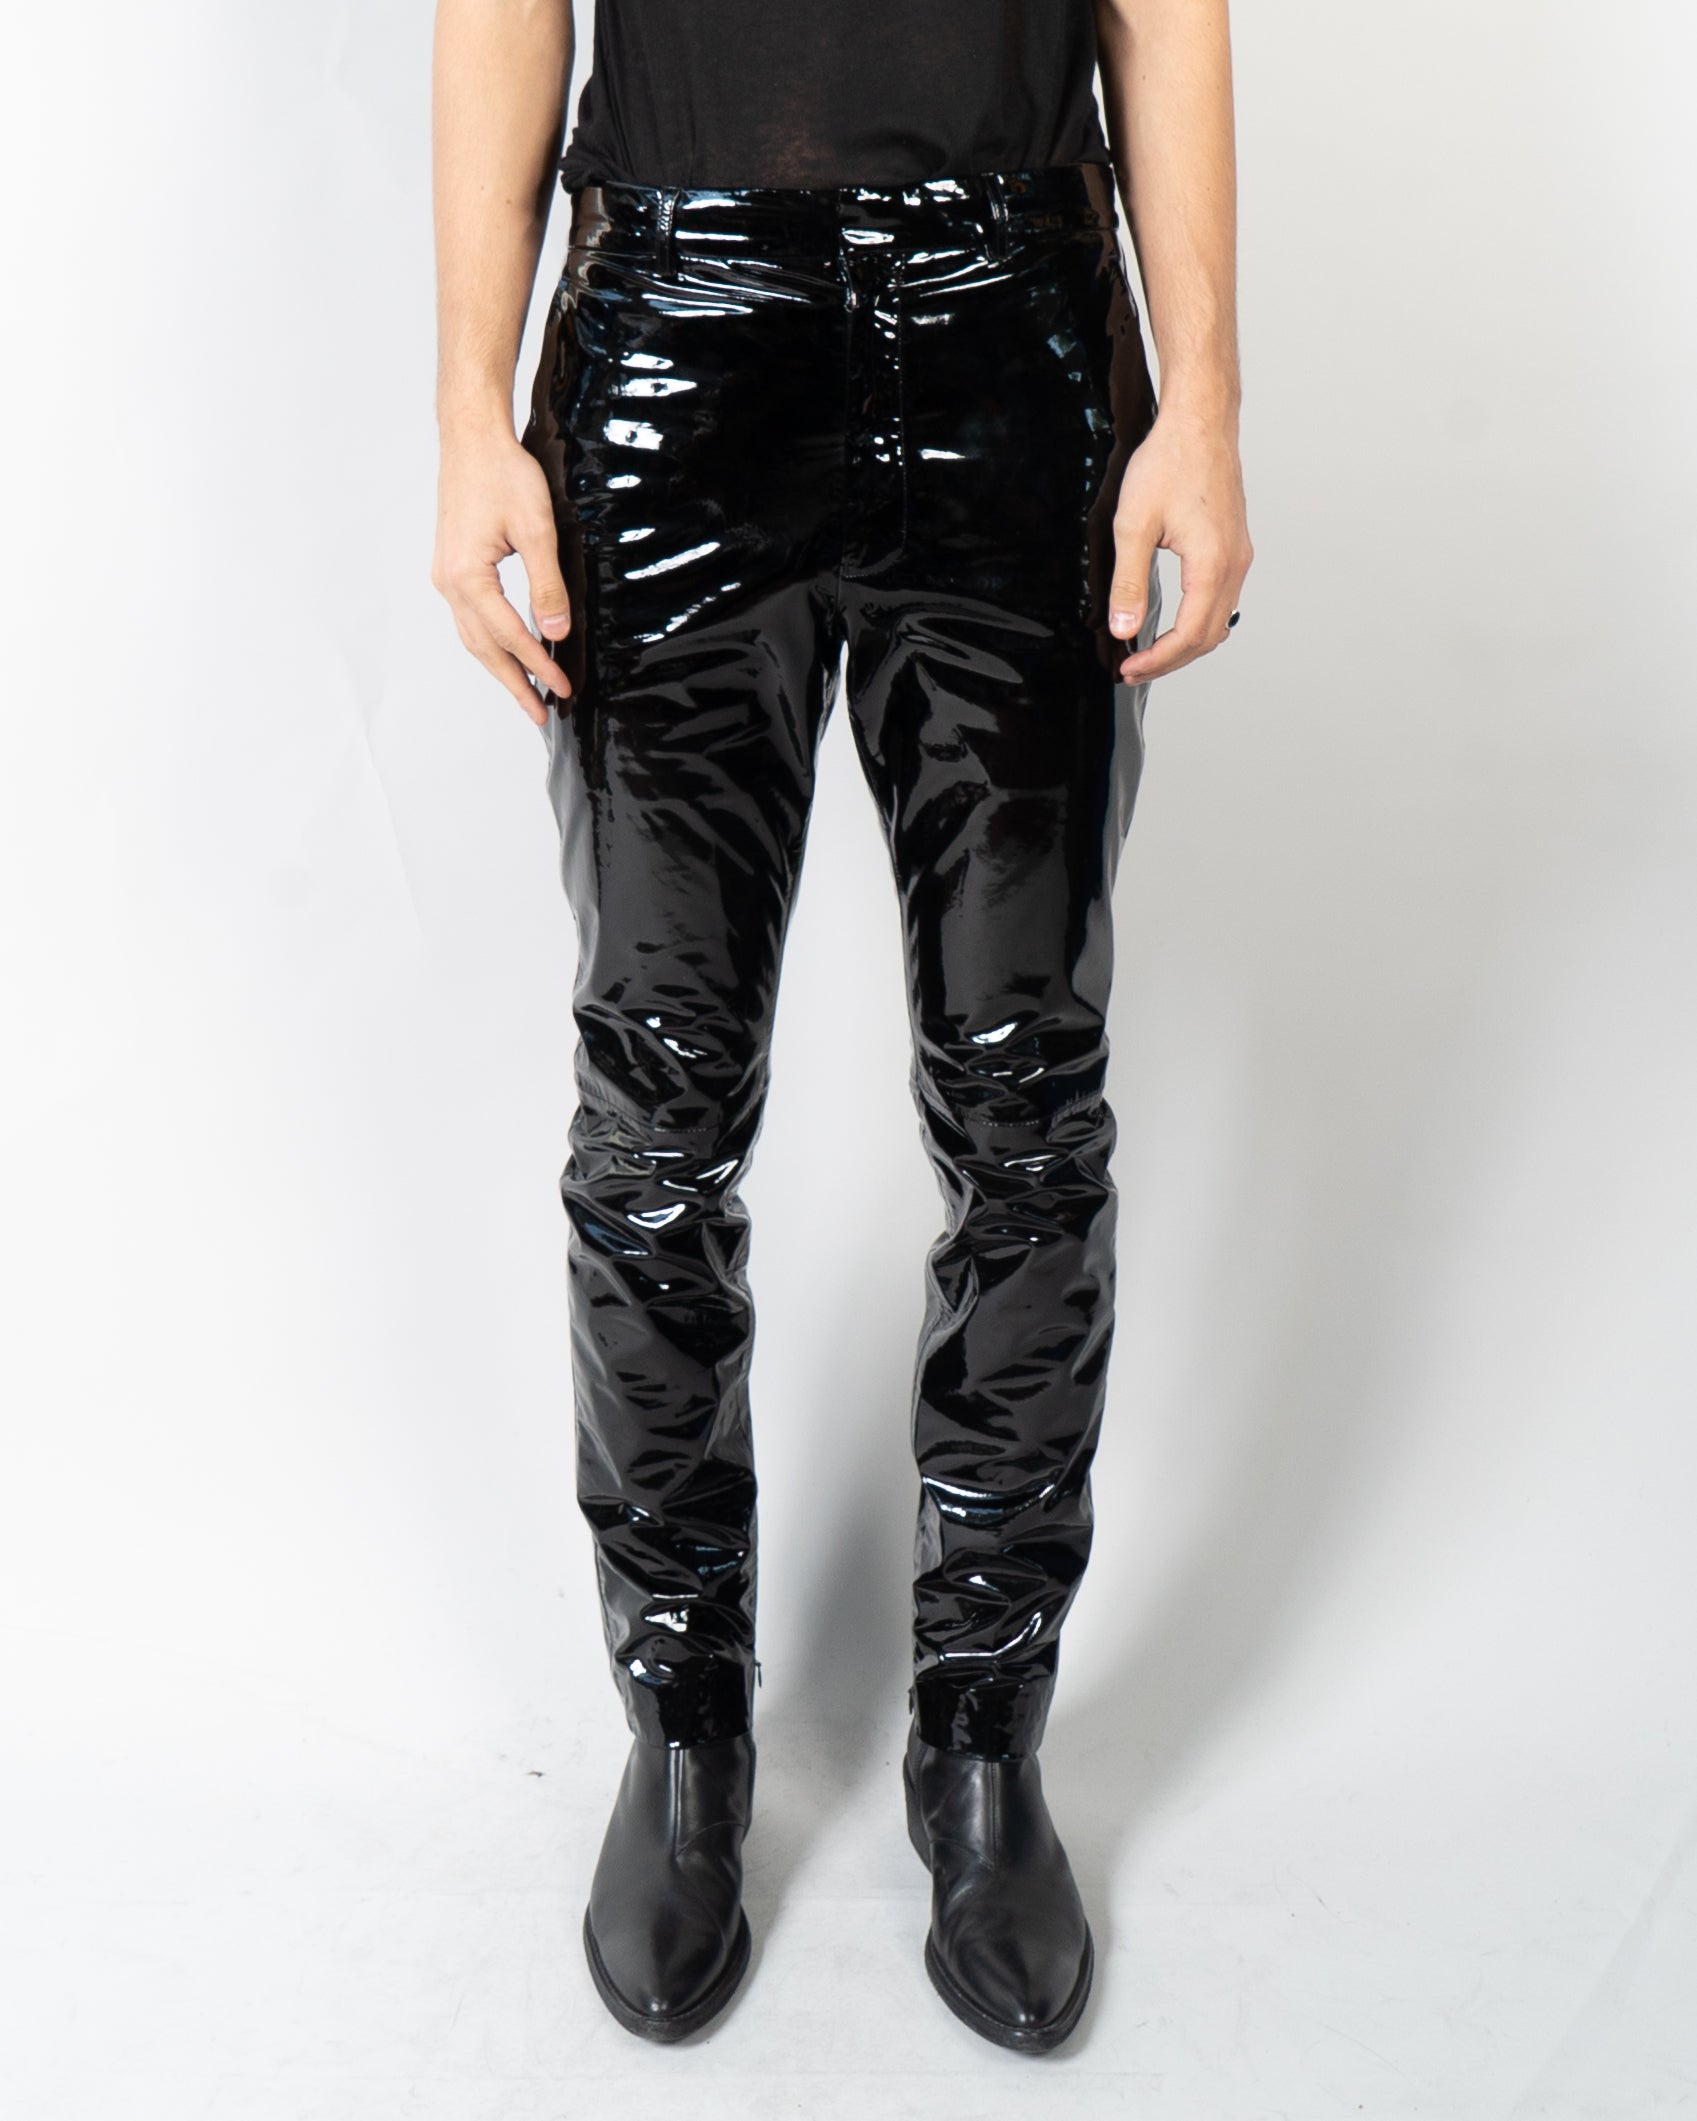 SS15 Vinyl Leather Trousers Sample